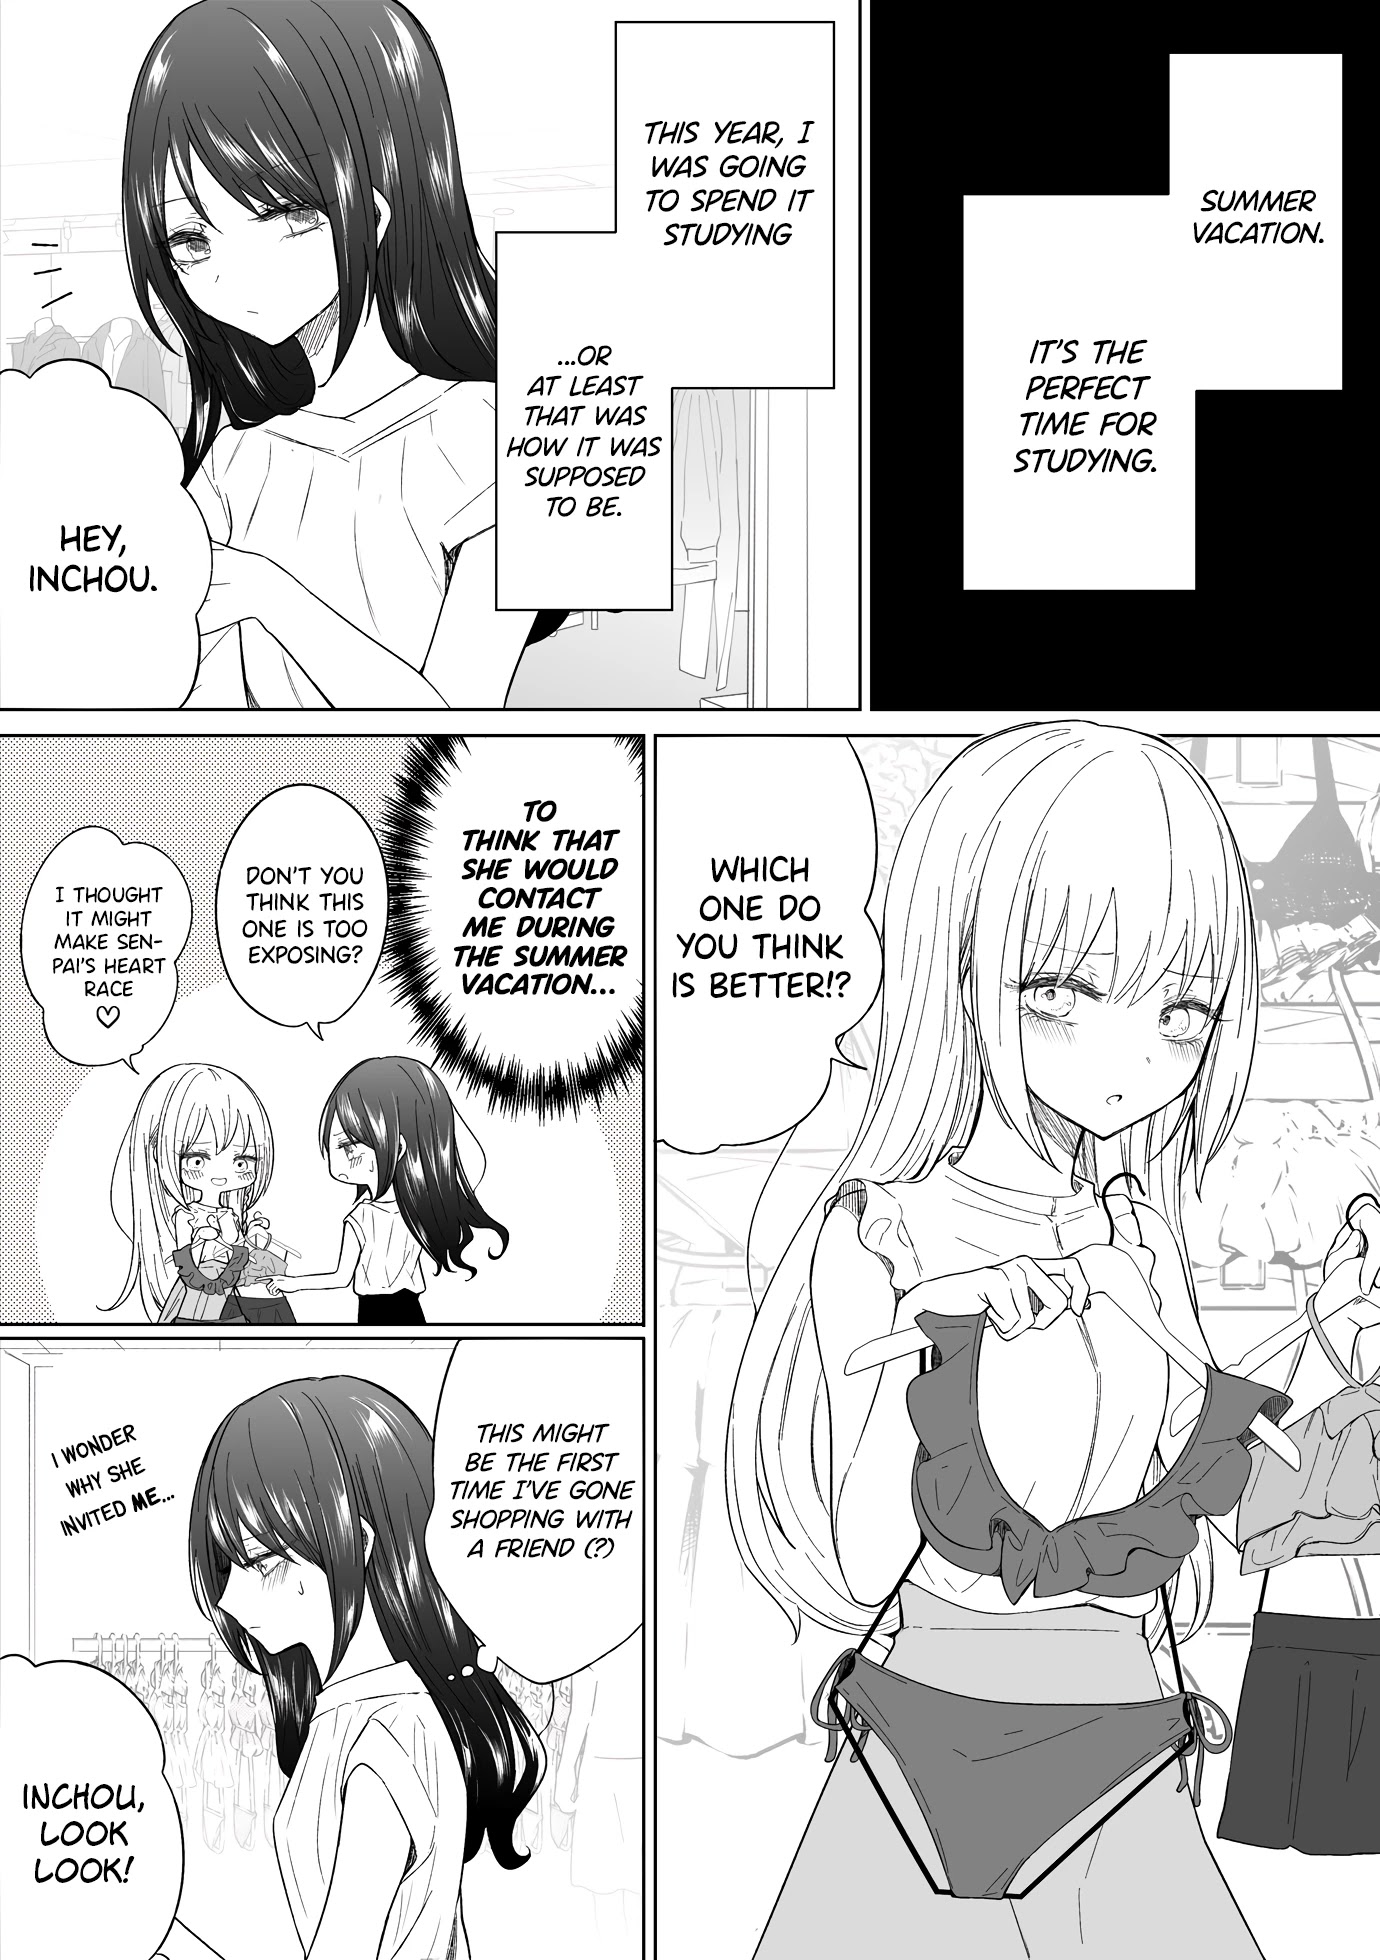 Ichizu De Bitch Na Kouhai Chapter 97: It Was Supposed To Be Like The Usual Summer Vacation - Picture 1